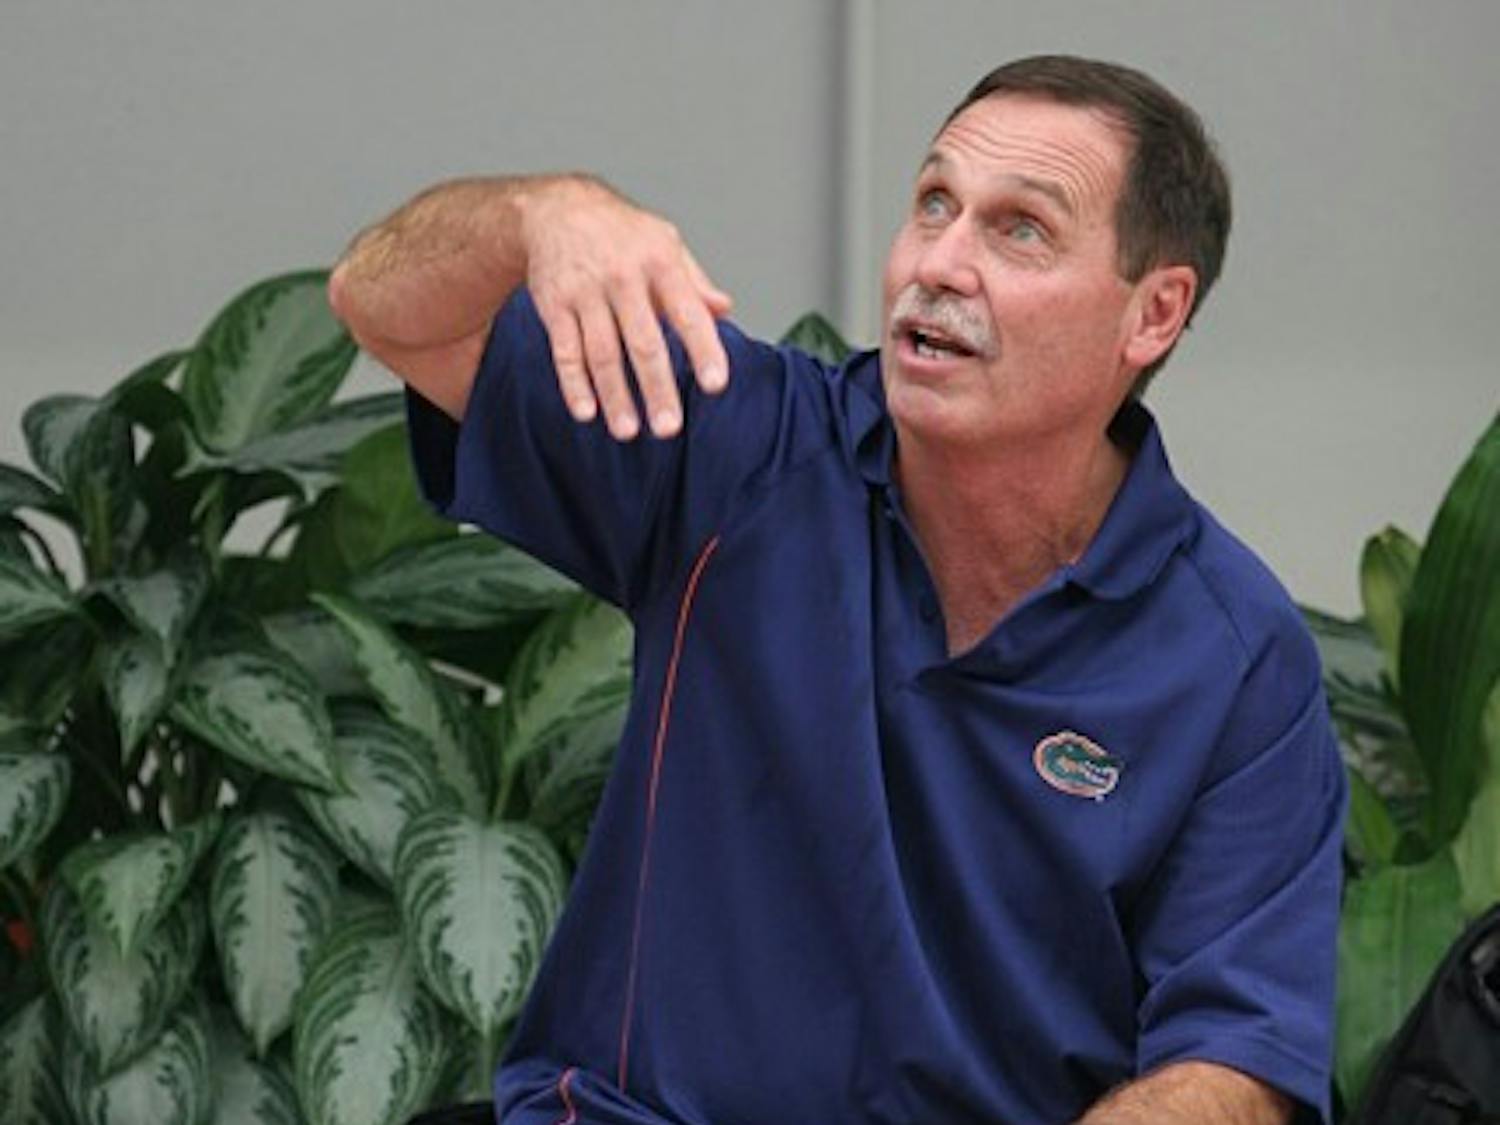 Under coach Gregg Troy (above),&nbsp;Florida returns 11 All-Americans this season on the men’s team and two-time Olympian Elizabeth Beisel to the women.&nbsp;